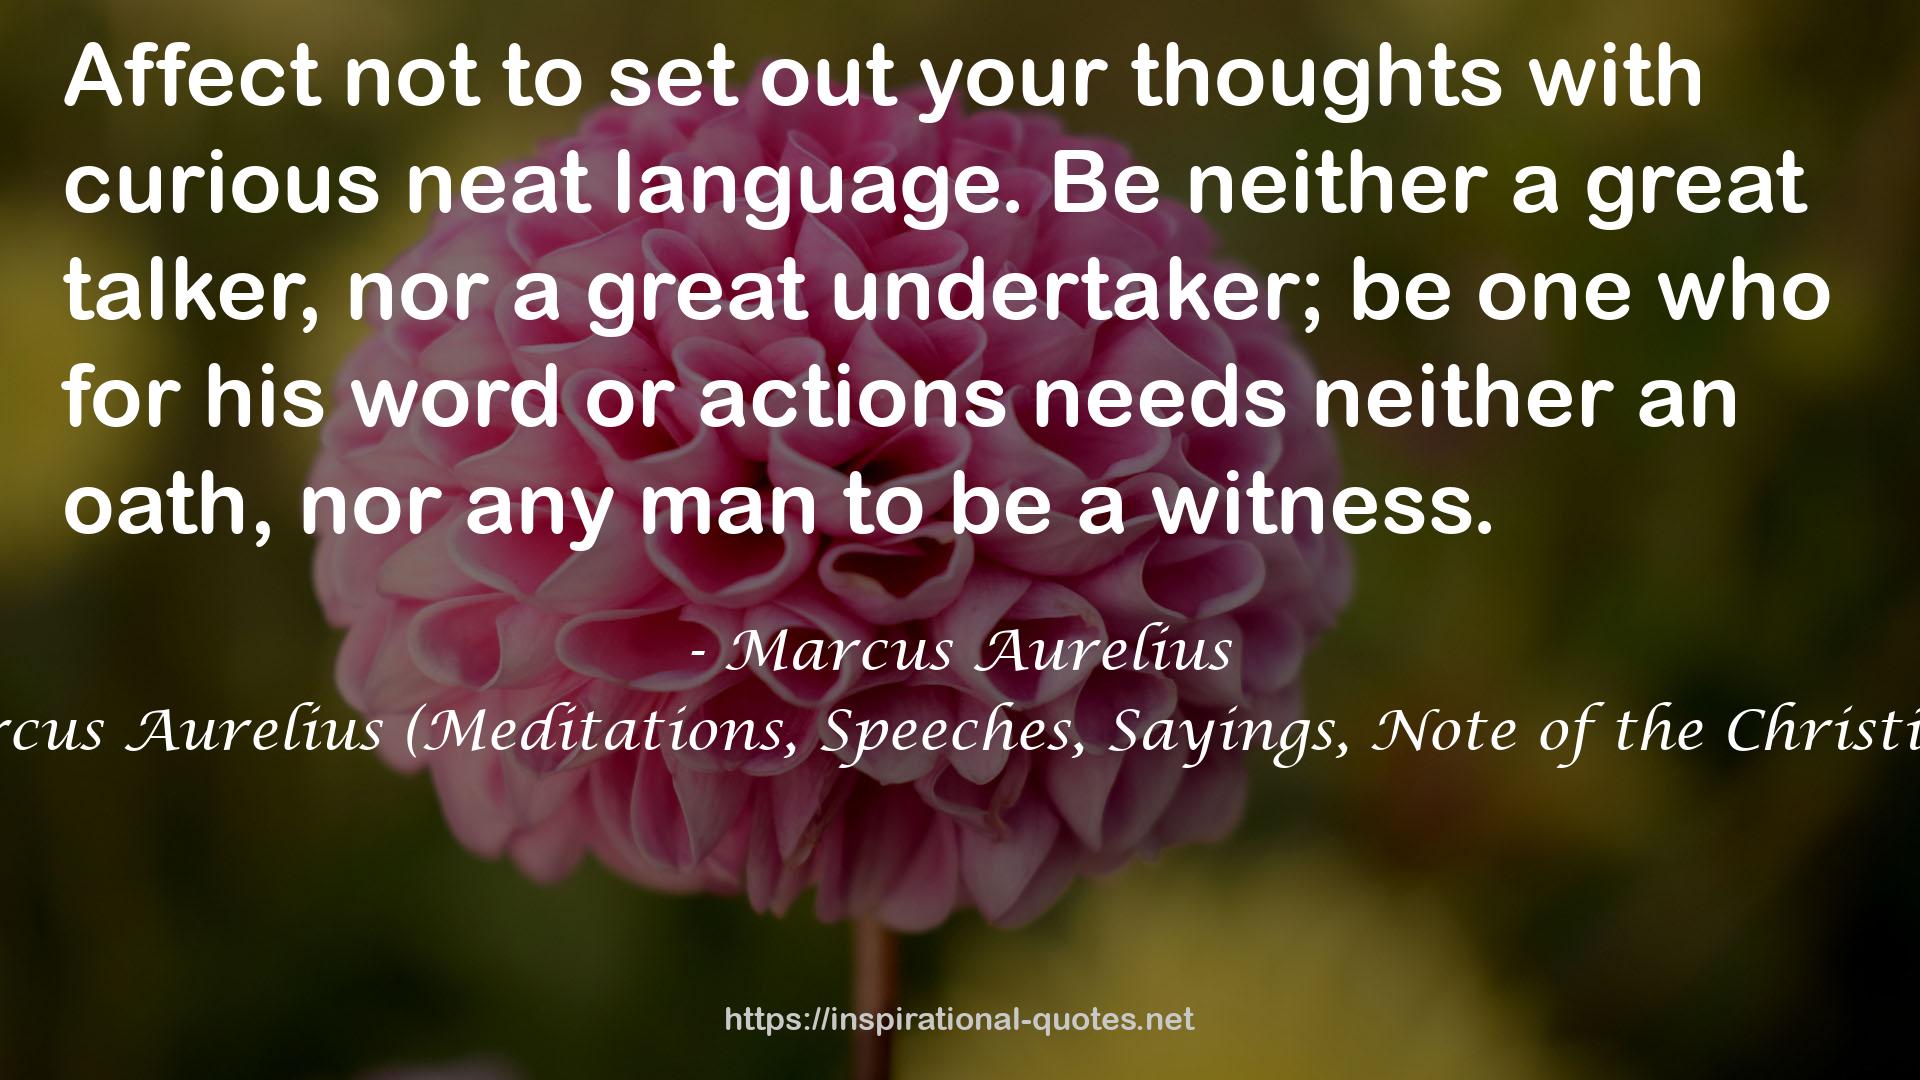 Marcus Aurelius (Meditations, Speeches, Sayings, Note of the Christians) QUOTES